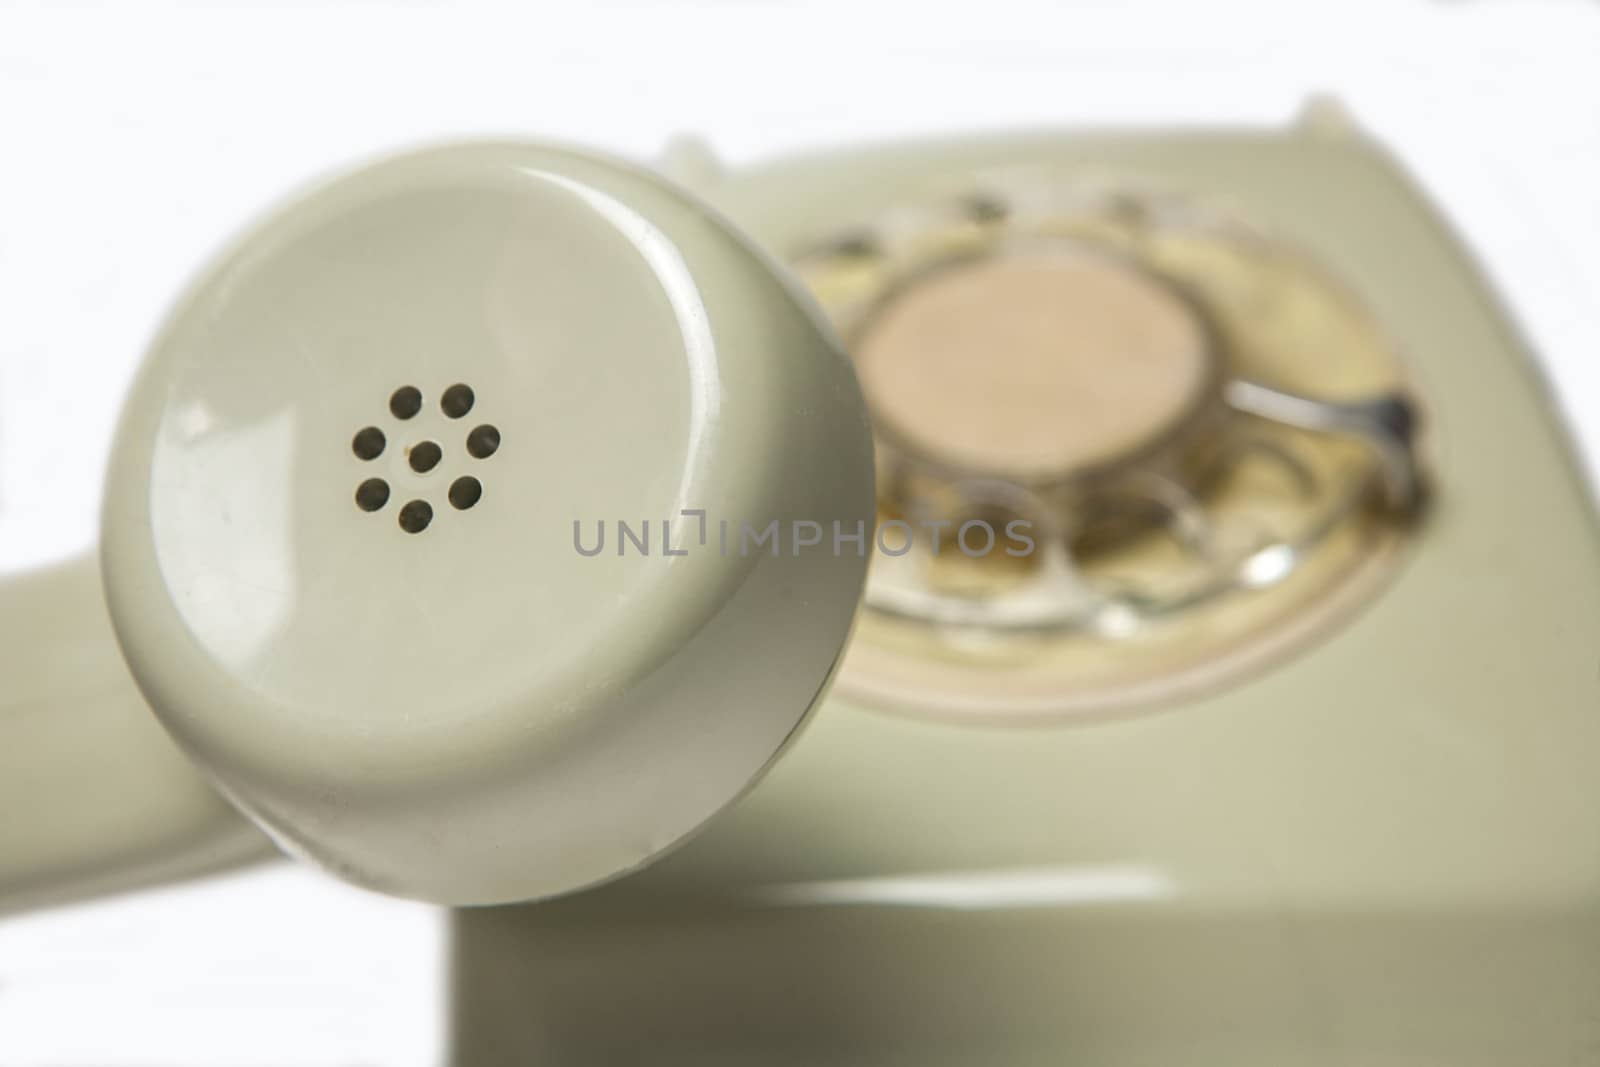 Vintage telephone receiver isolated on white background  by digicomphoto